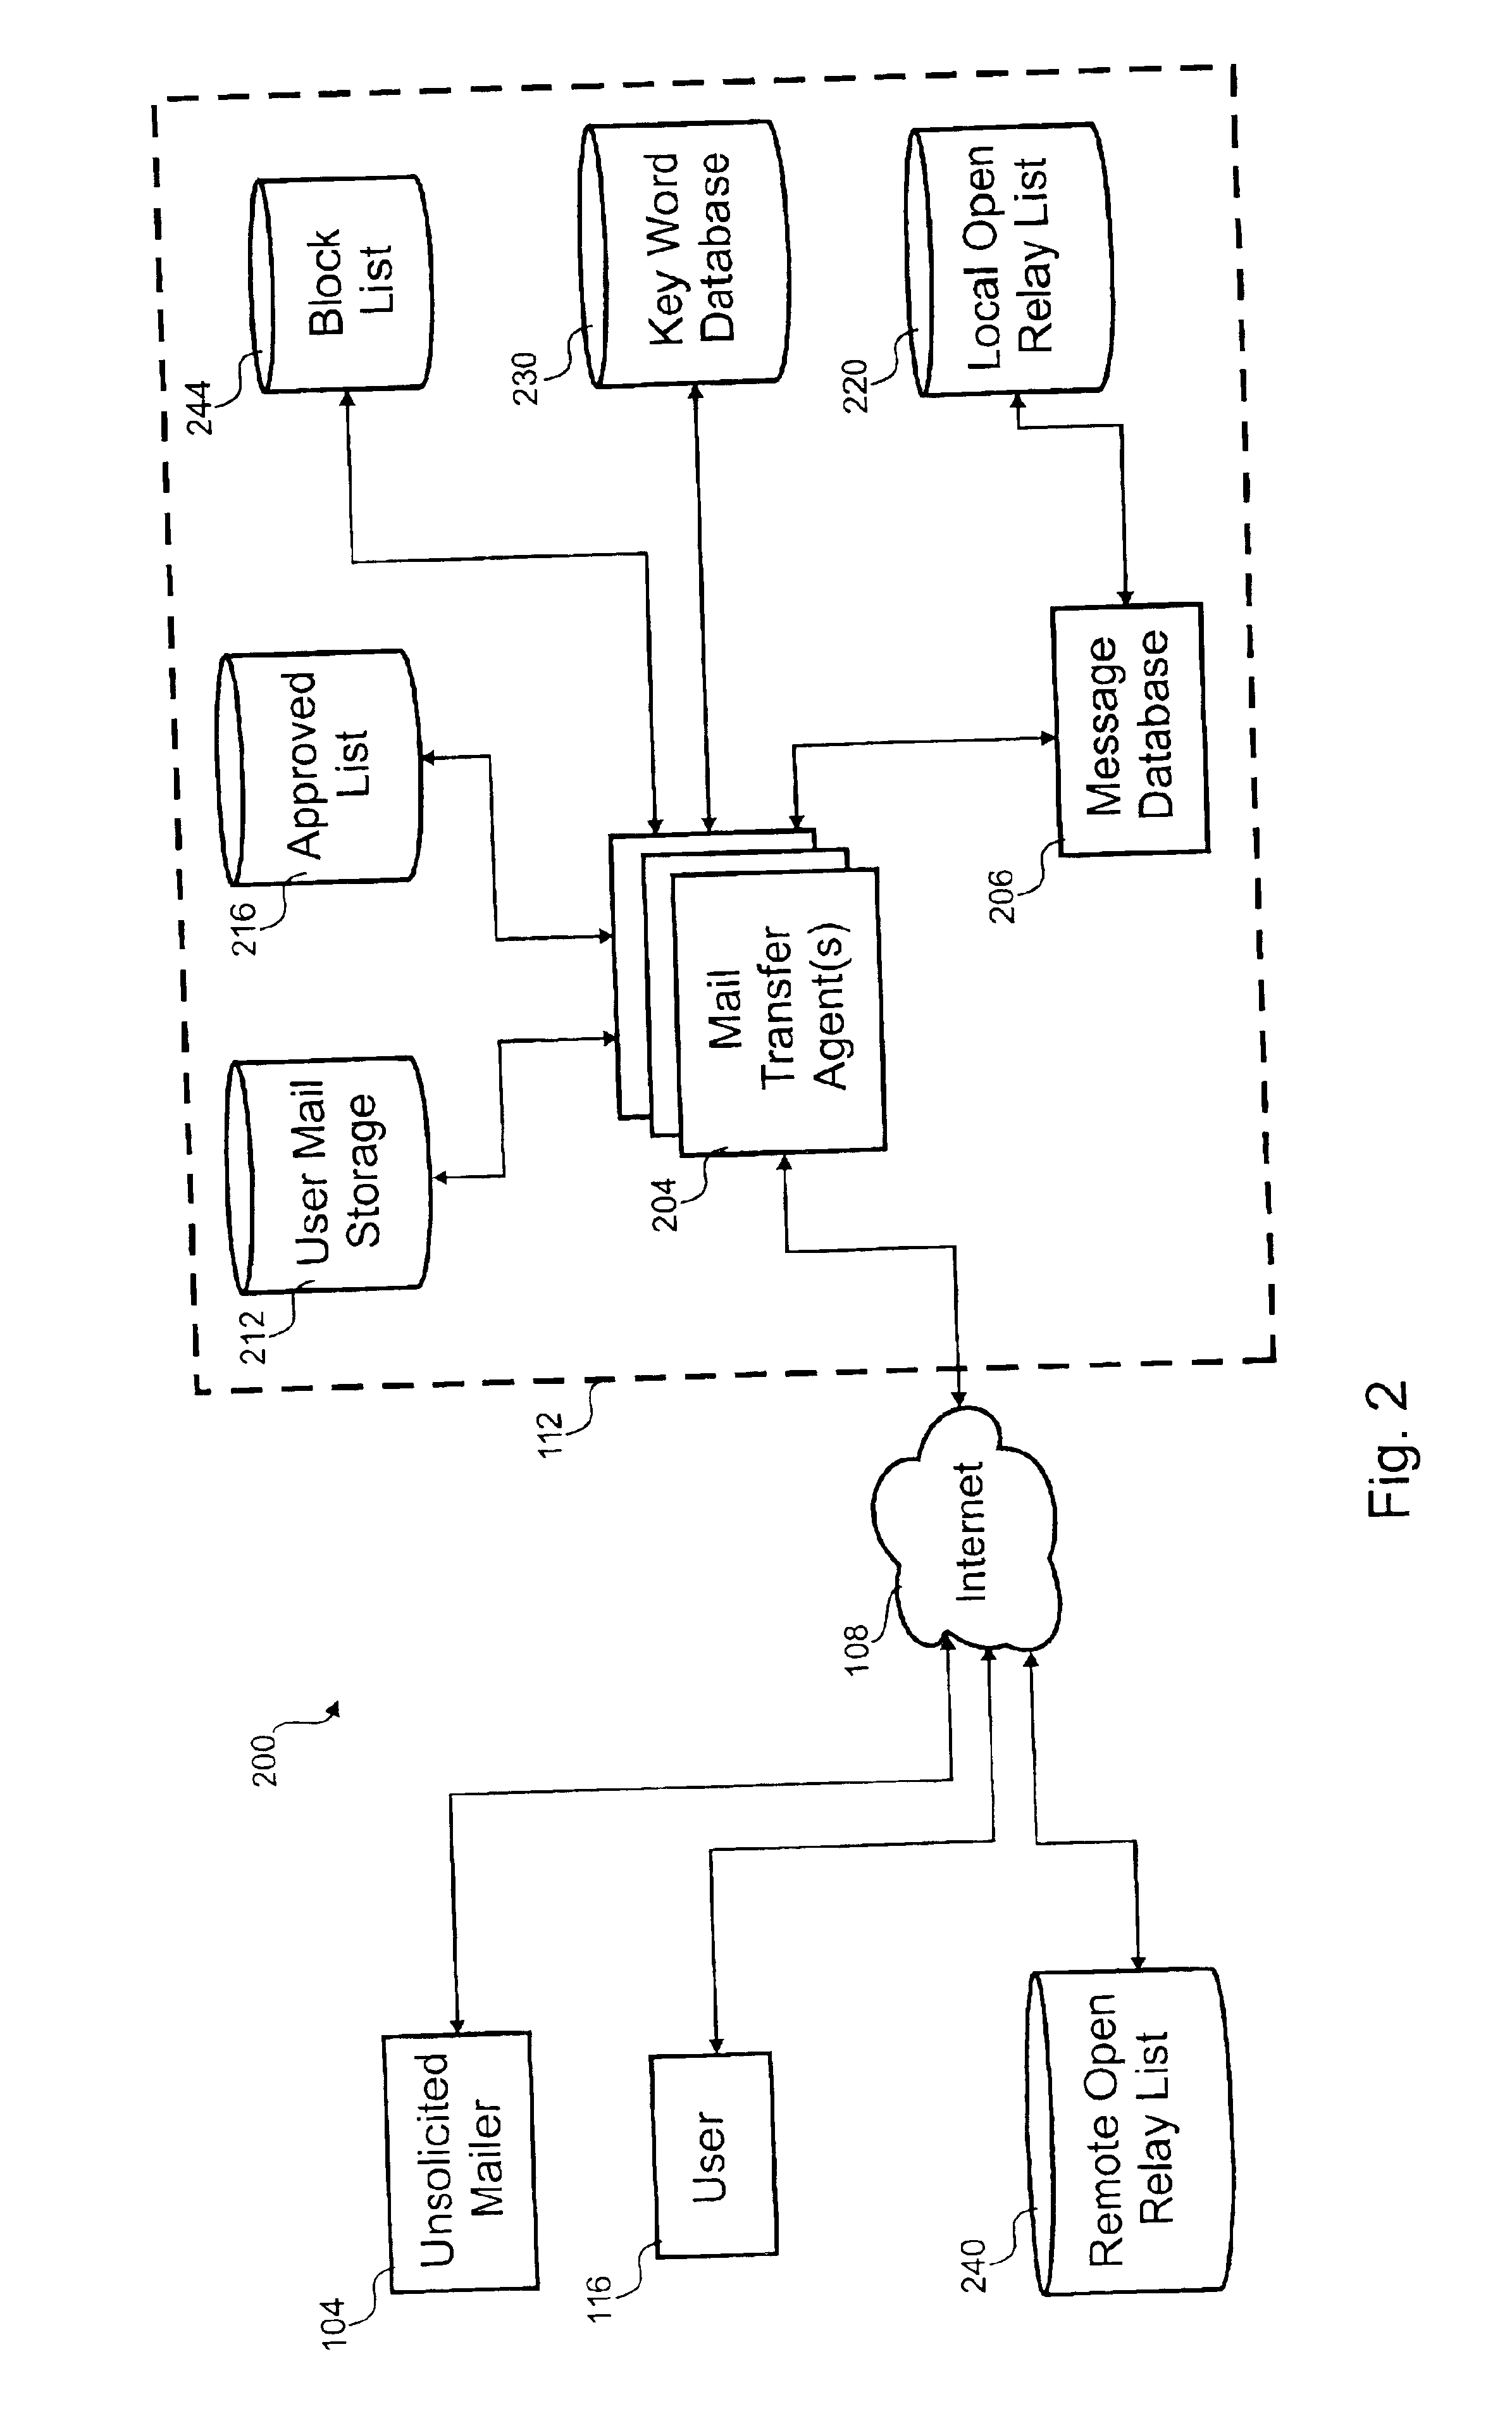 Processing of textual electronic communication distributed in bulk